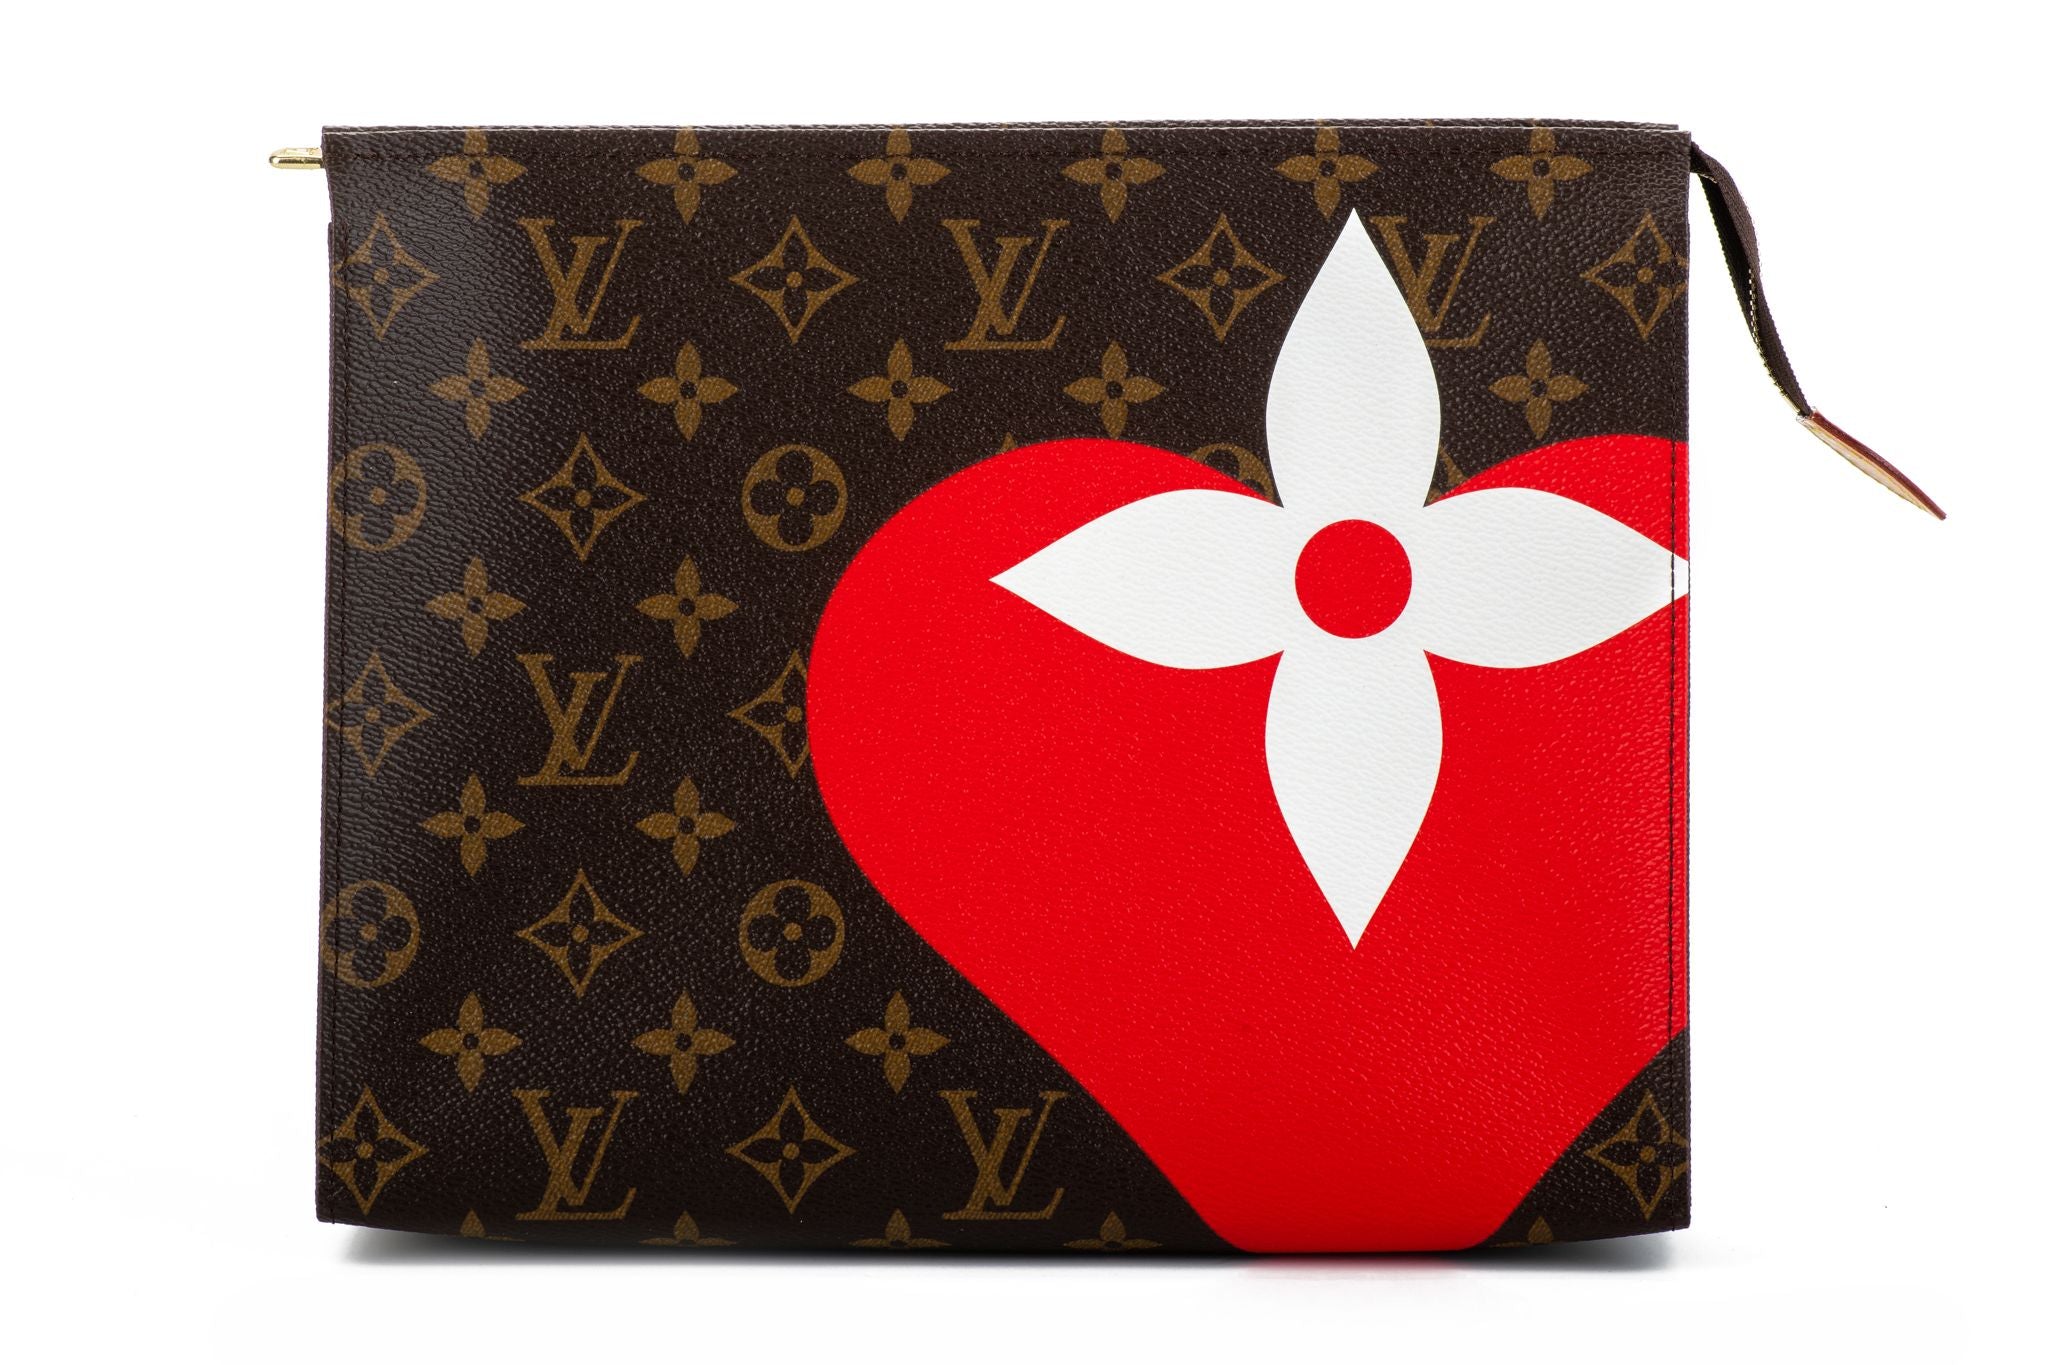 Louis Vuitton Game On Cruise 2021 Bag and Small Leather Goods